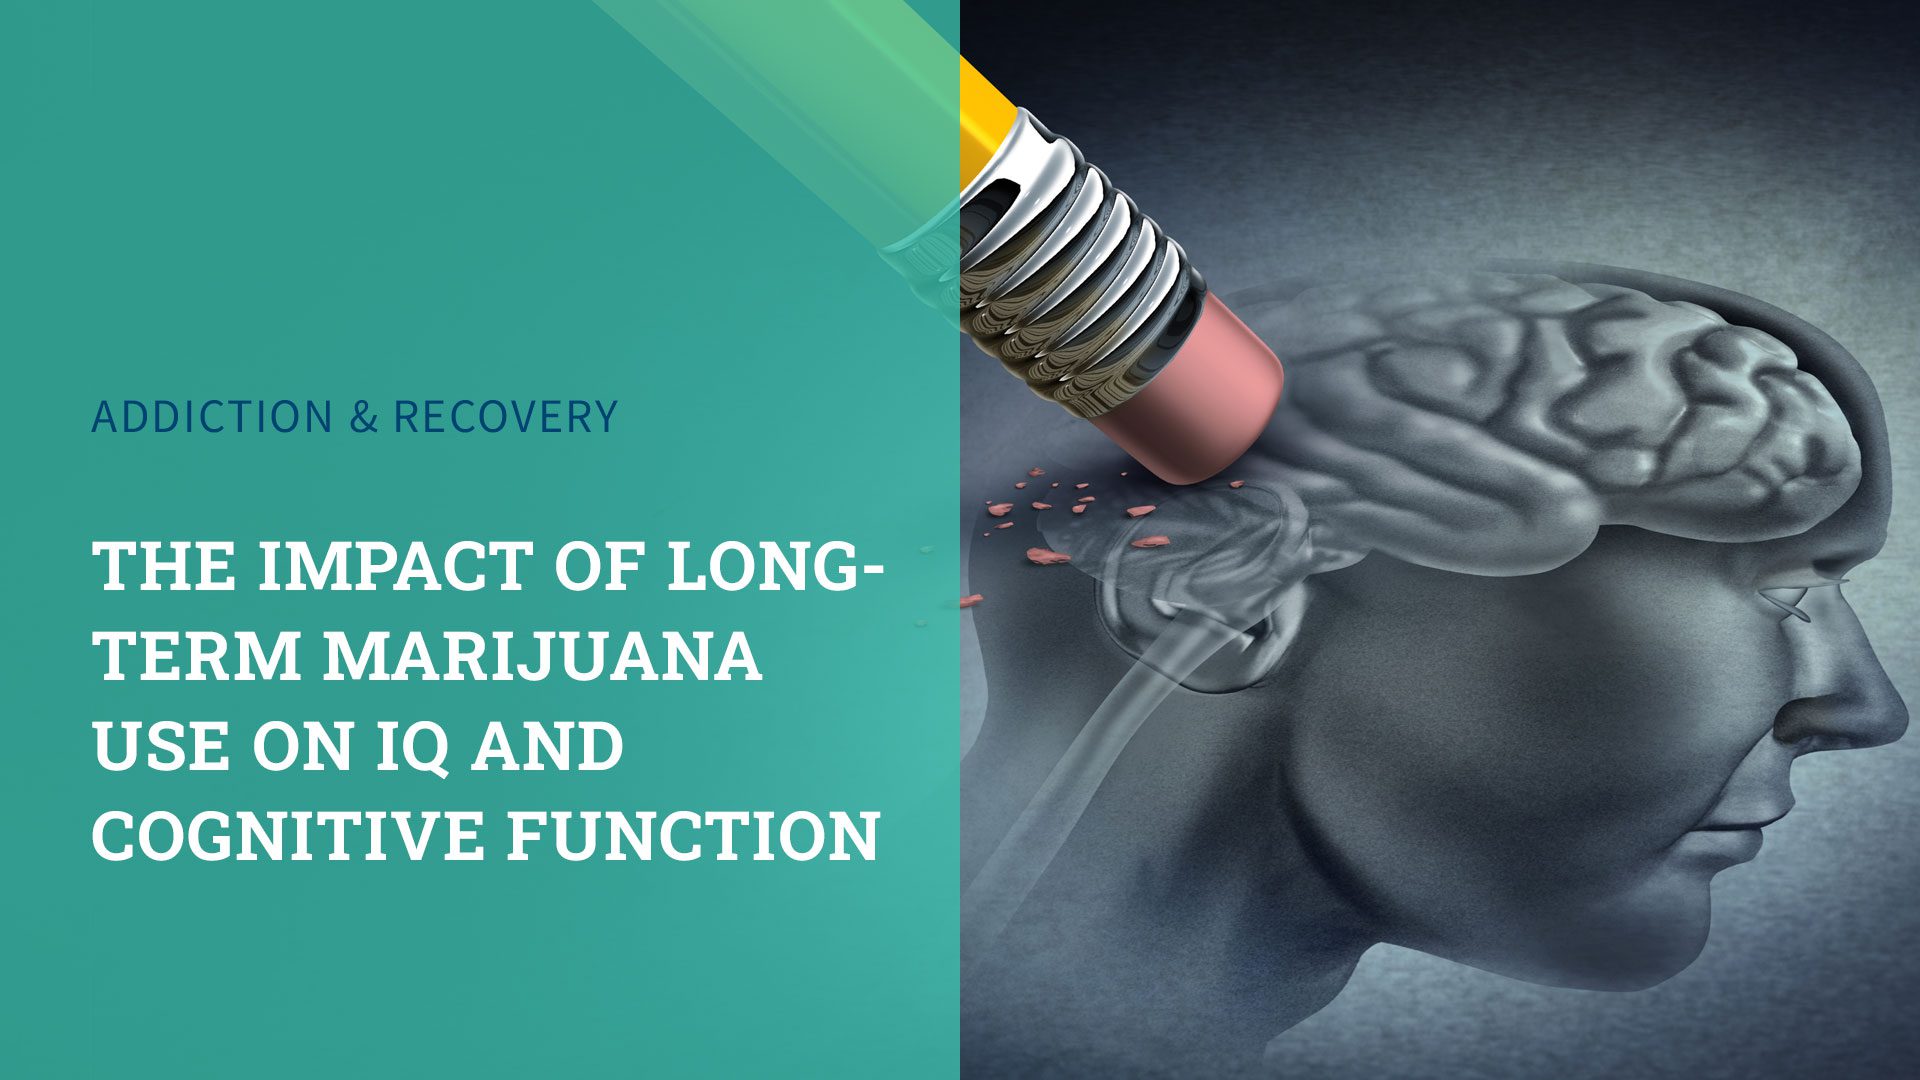 The Impact of Long-Term Marijuana Use on IQ and Cognitive Function